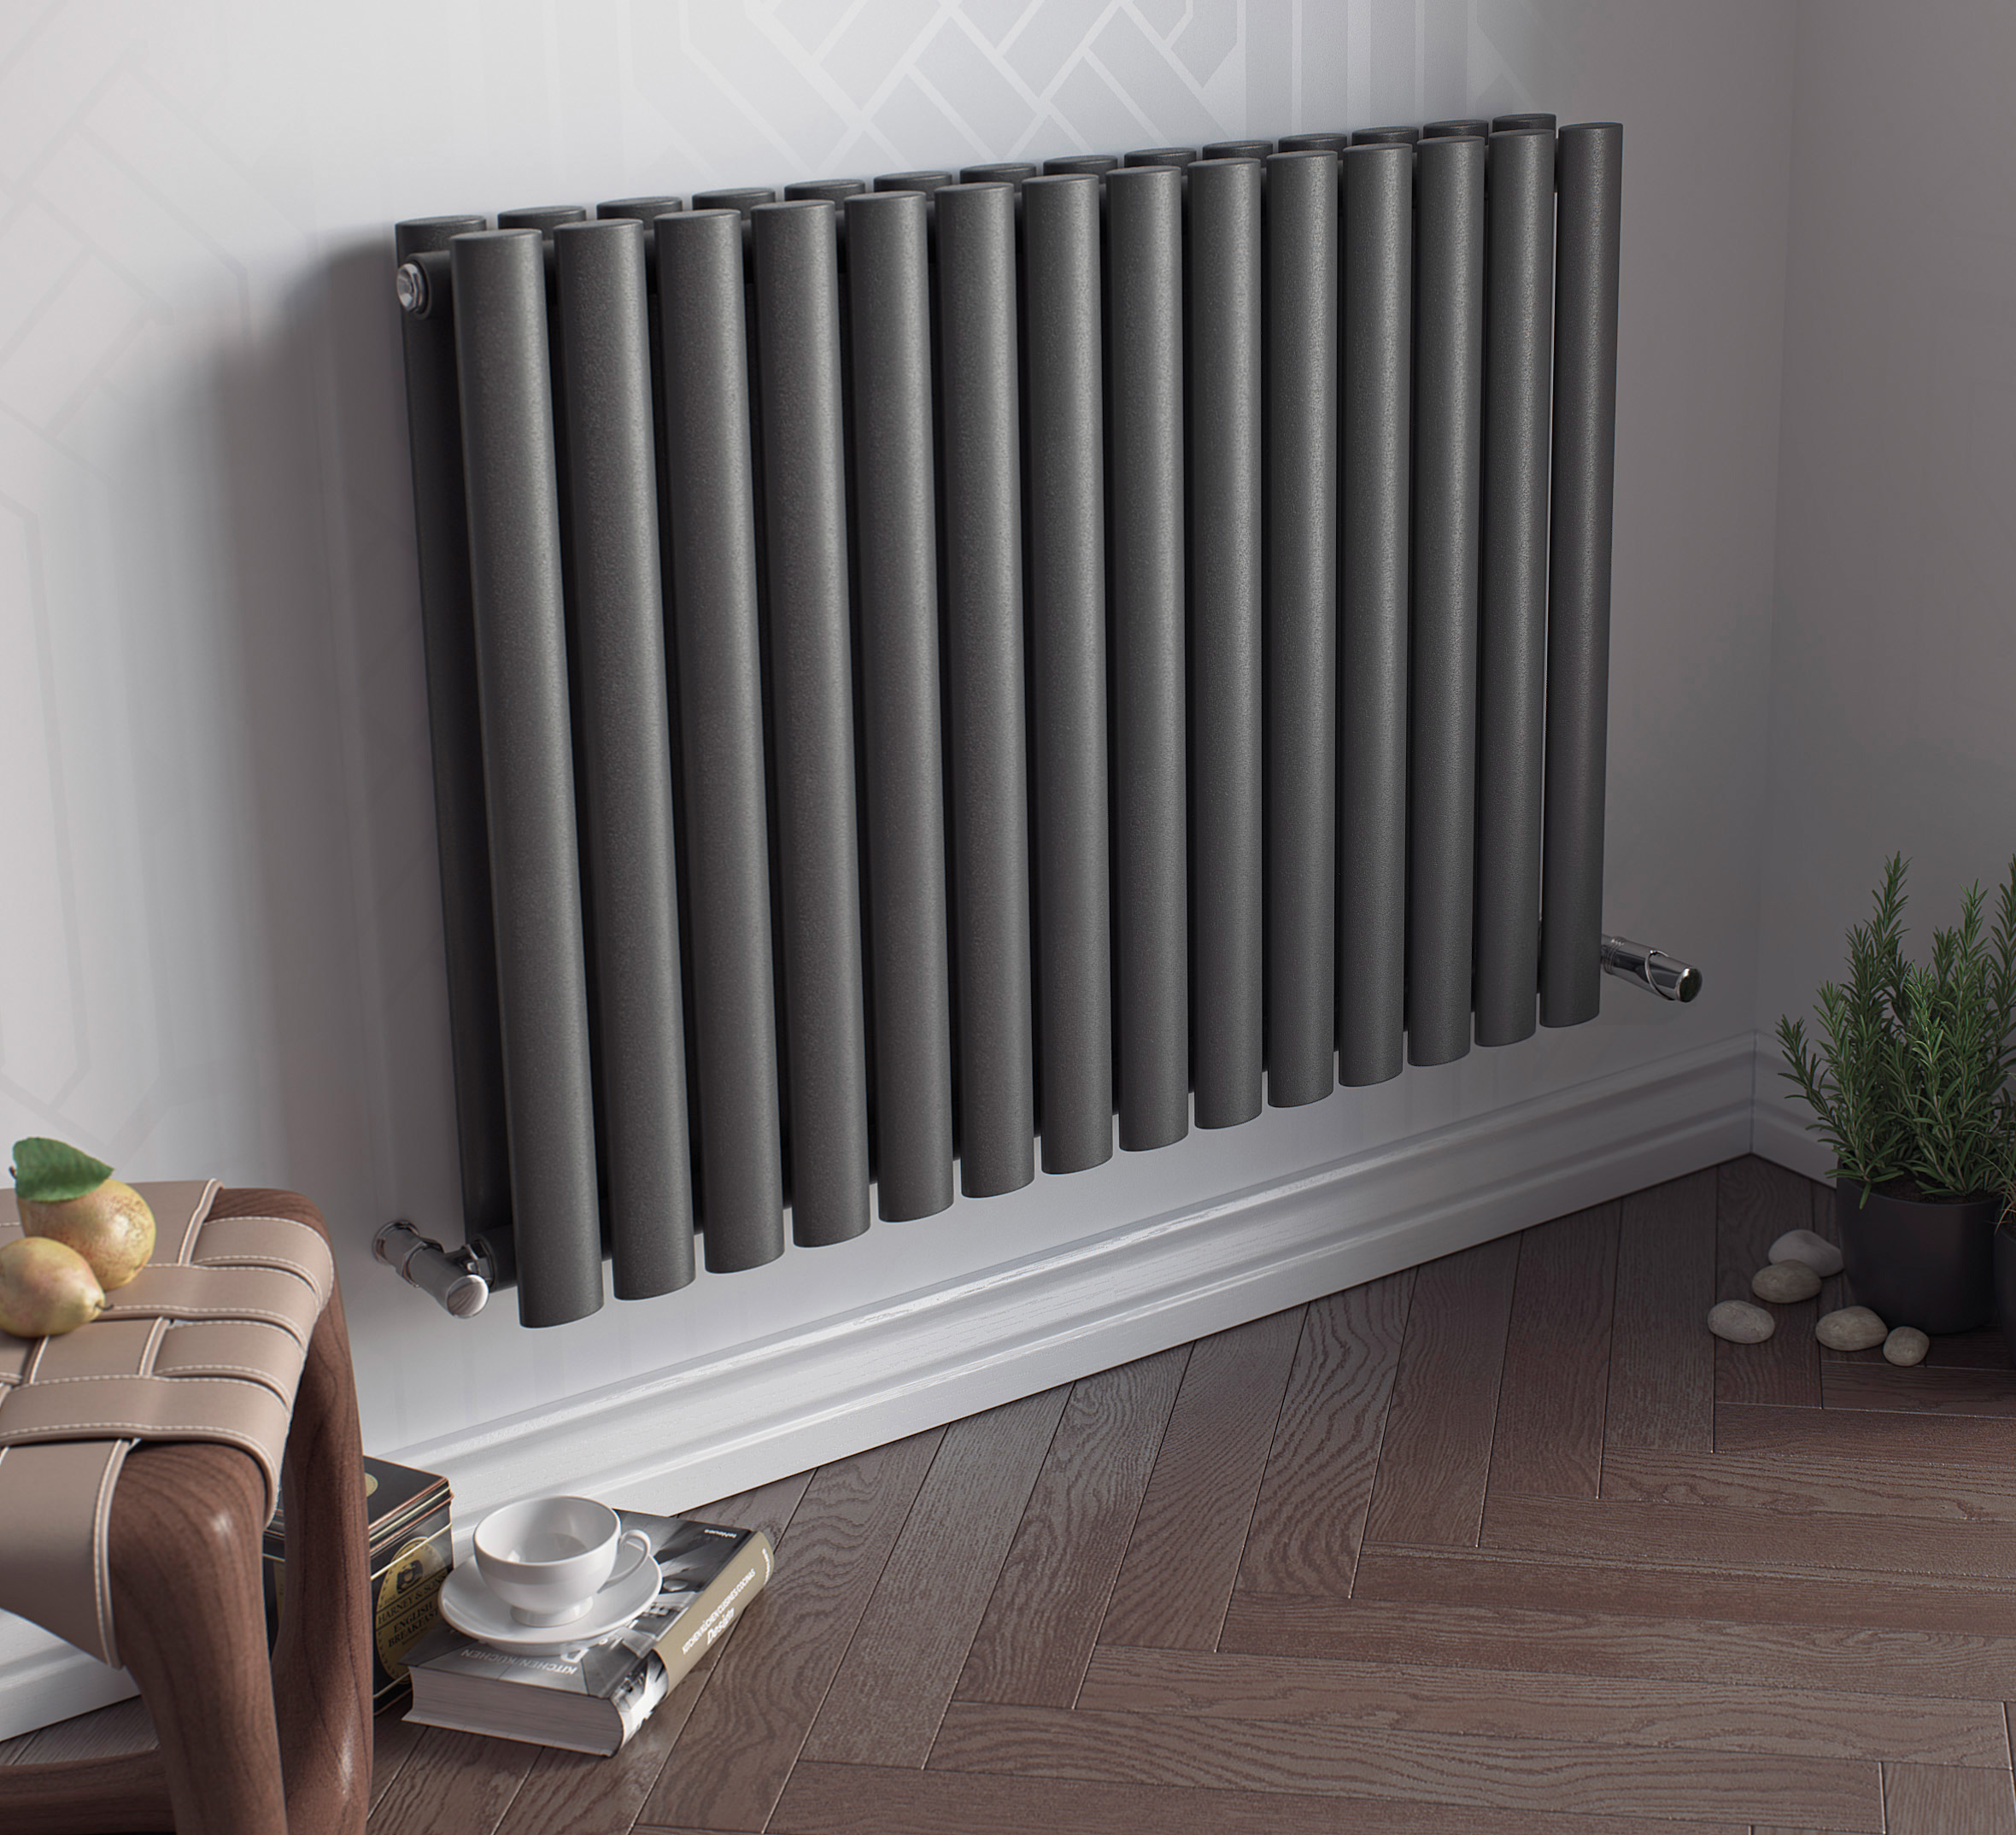 How Tube Heaters Are Perfect To Keep Your Room Warm?